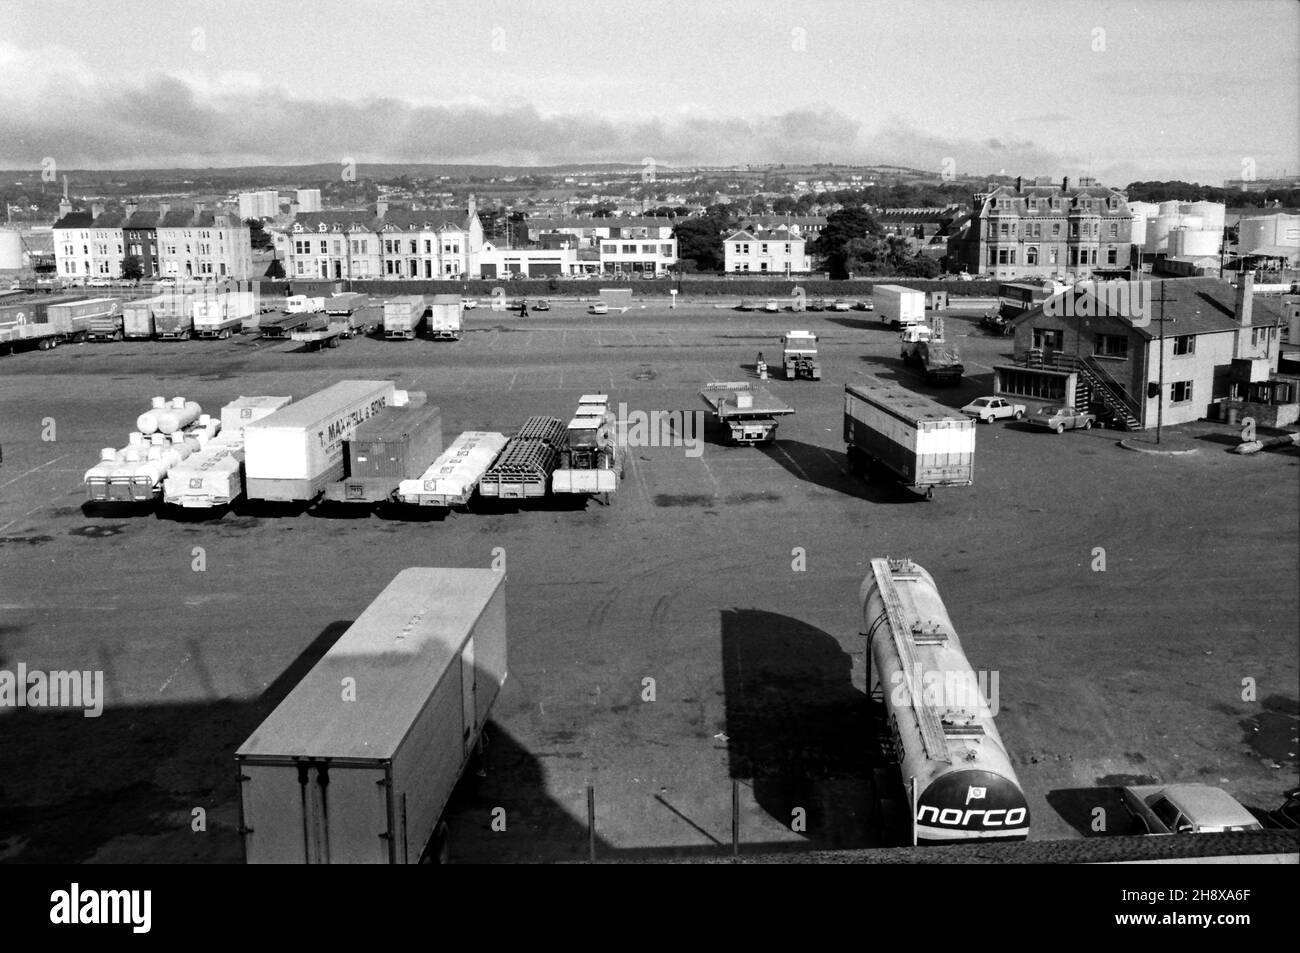 Trailers and containers at the ferry terminal in Larne, Northern Ireland. With houses and H.M. Coastguard building on Olderfleet Road beyond. Taken from P&O Freight Ferry M/V Bison. February 1984 Stock Photo